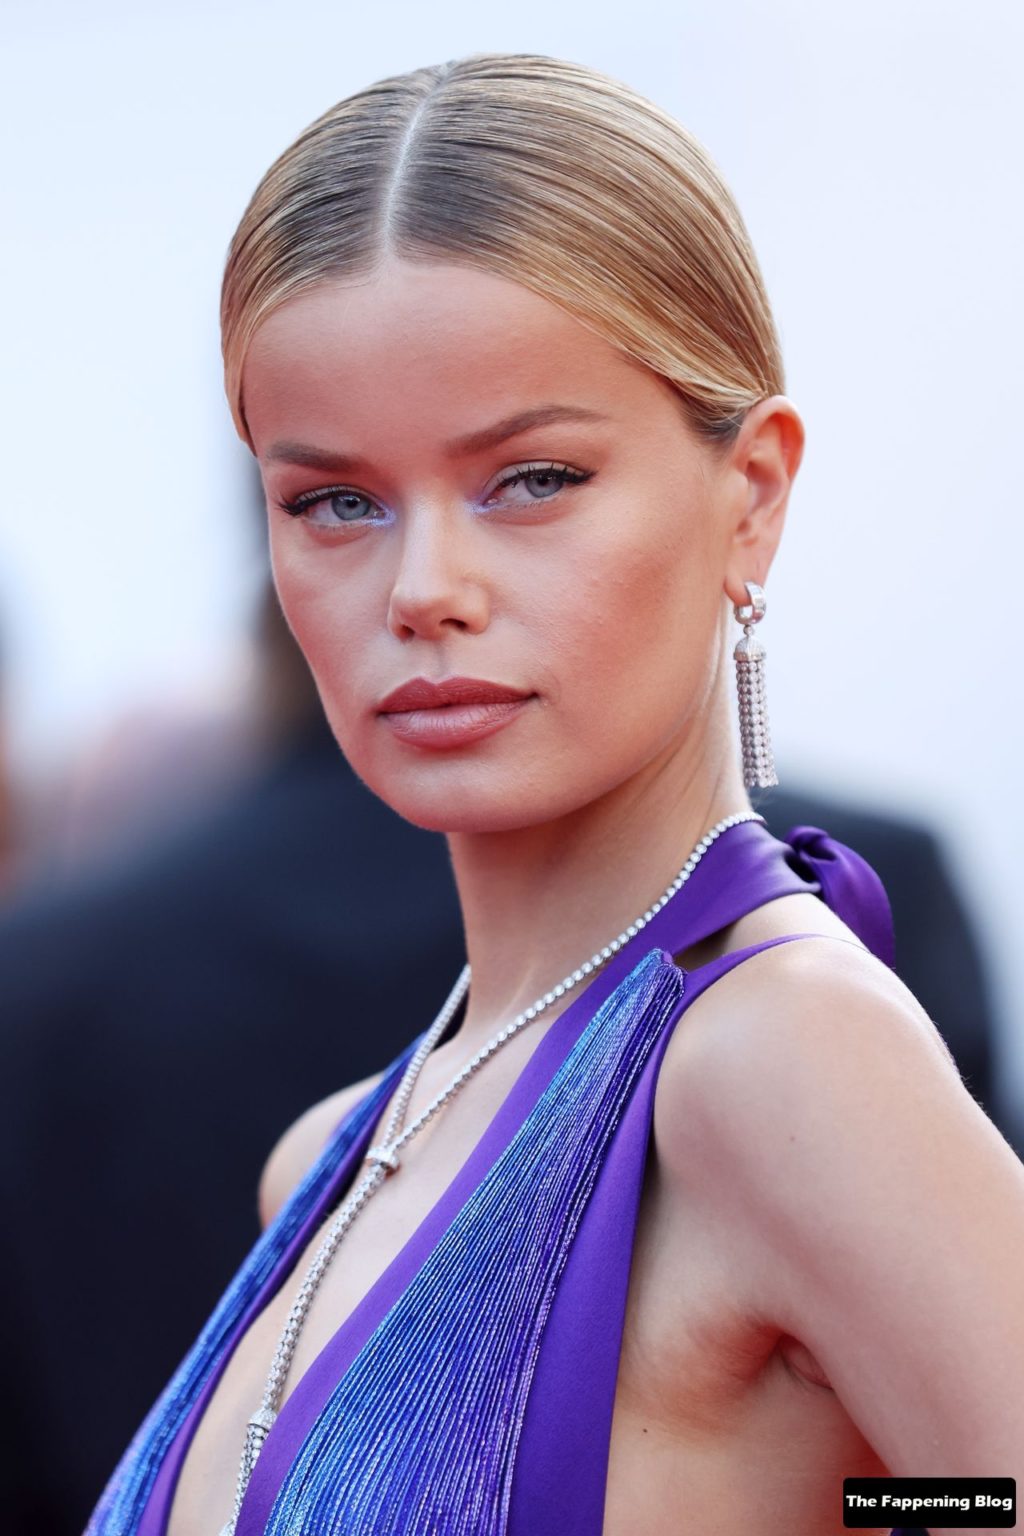 Frida Aasen Sexy The Fappening Blog 30 1 1024x1536 - Frida Aasen Poses on the Red Carpet at the 75th Annual Cannes Film Festival (150 Photos)